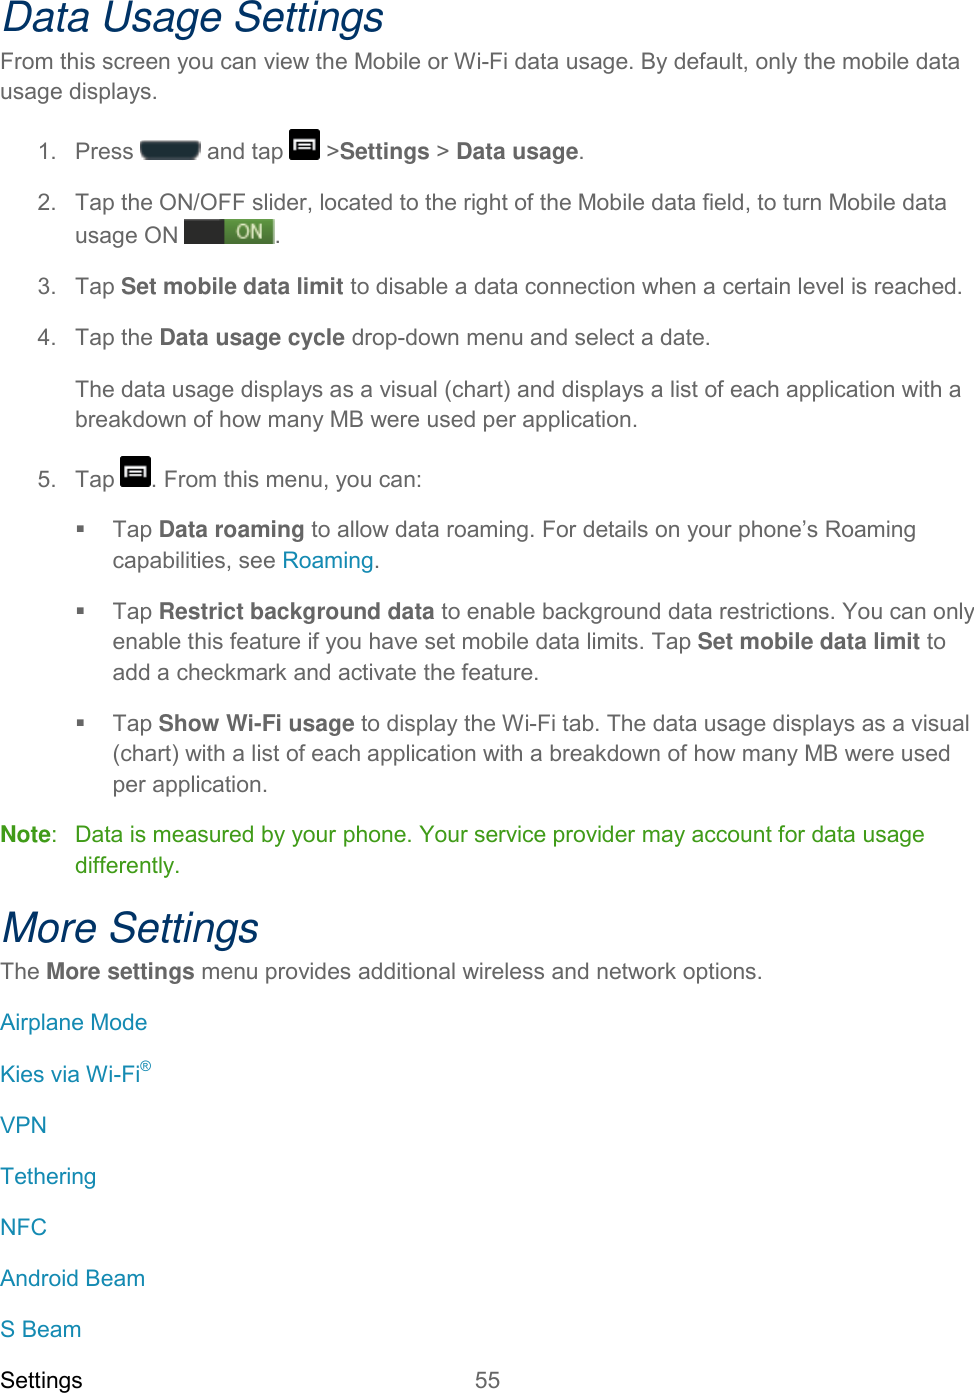 Settings 55   Data Usage Settings From this screen you can view the Mobile or Wi-Fi data usage. By default, only the mobile data usage displays.  1.  Press   and tap   &gt;Settings &gt; Data usage. 2.  Tap the ON/OFF slider, located to the right of the Mobile data field, to turn Mobile data usage ON . 3.  Tap Set mobile data limit to disable a data connection when a certain level is reached.  4.  Tap the Data usage cycle drop-down menu and select a date. The data usage displays as a visual (chart) and displays a list of each application with a breakdown of how many MB were used per application. 5.  Tap  . From this menu, you can:    Tap Data roaming to allow data roaming. For details on your phone’s Roaming capabilities, see Roaming.   Tap Restrict background data to enable background data restrictions. You can only enable this feature if you have set mobile data limits. Tap Set mobile data limit to add a checkmark and activate the feature.   Tap Show Wi-Fi usage to display the Wi-Fi tab. The data usage displays as a visual (chart) with a list of each application with a breakdown of how many MB were used per application. Note:  Data is measured by your phone. Your service provider may account for data usage differently. More Settings The More settings menu provides additional wireless and network options. Airplane Mode Kies via Wi-Fi® VPN Tethering NFC Android Beam S Beam 